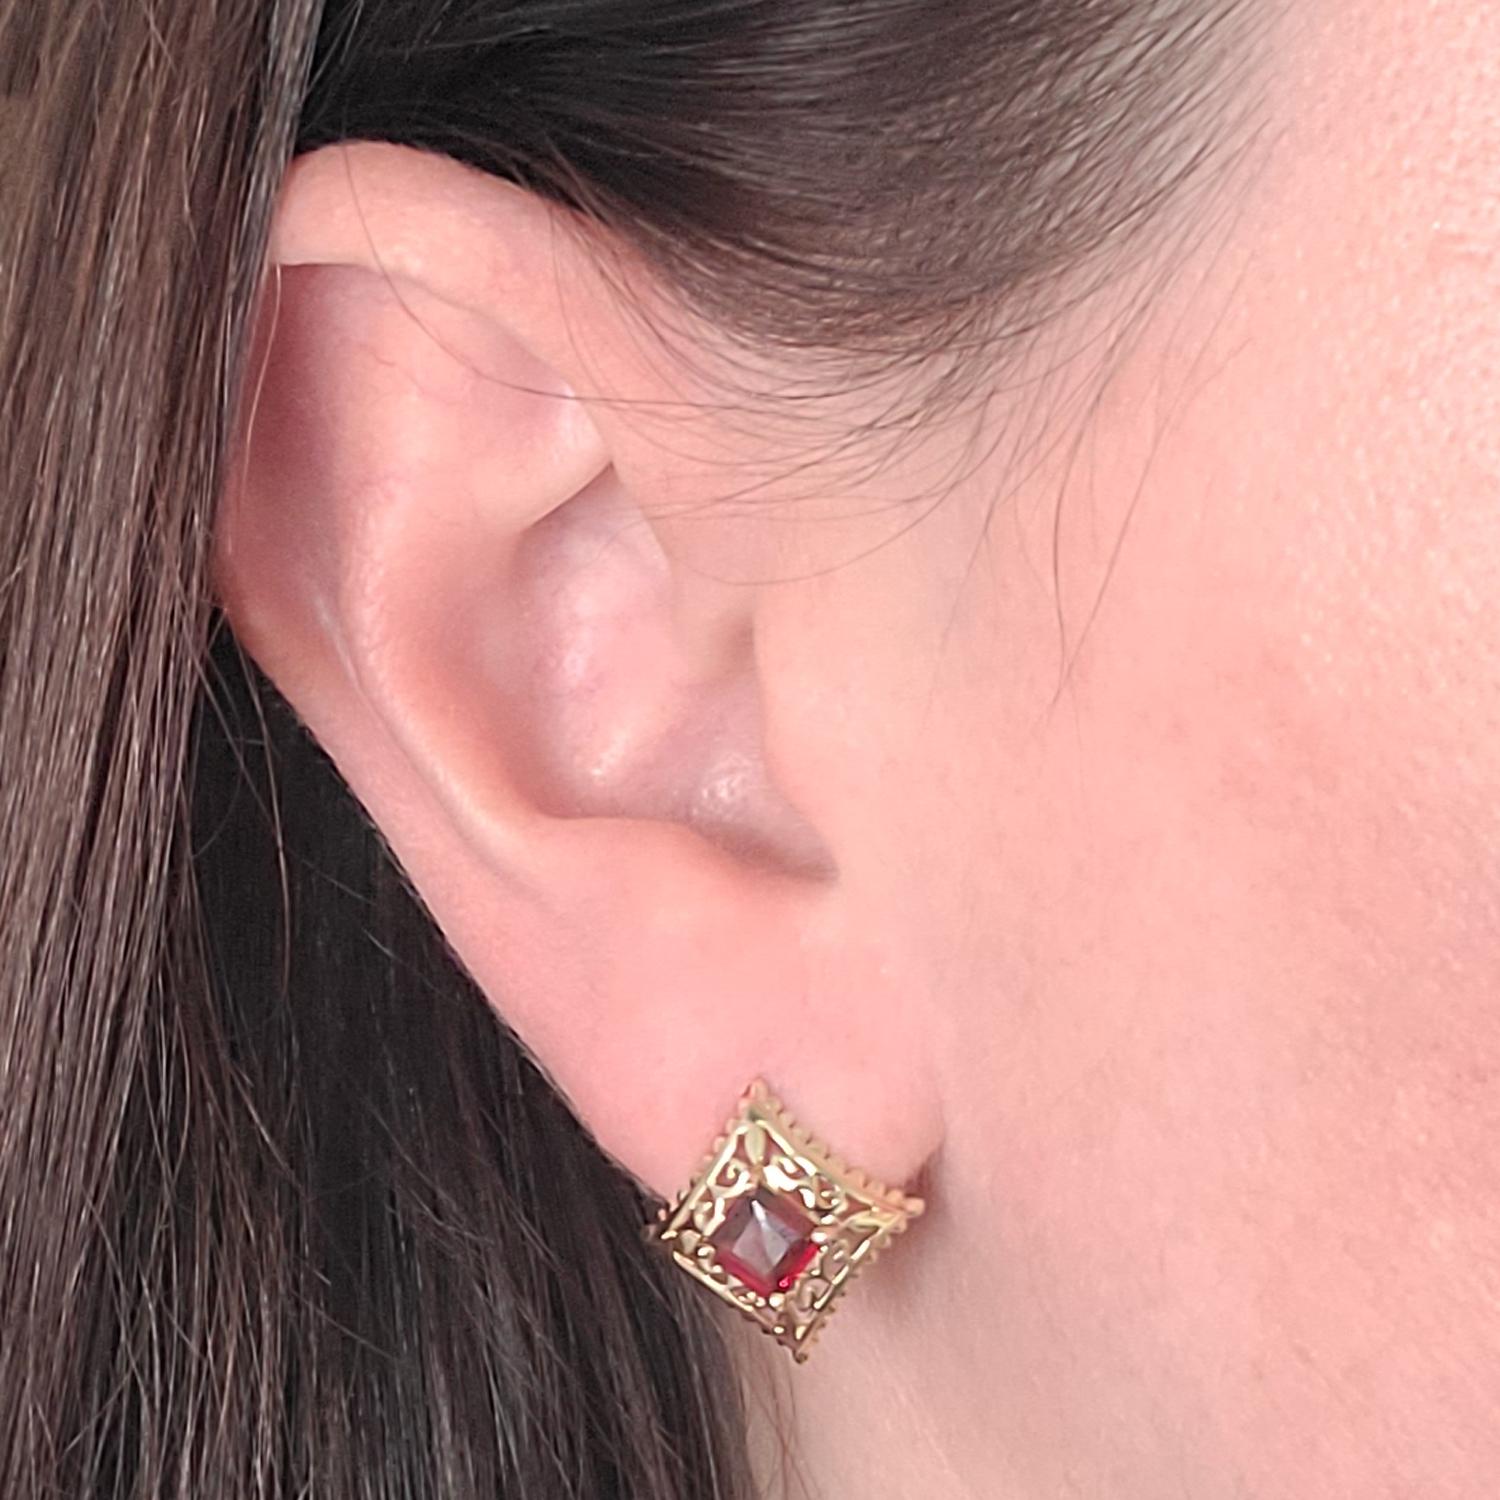 14 Kart Yellow Gold Earrings Featuring 2 Square Cut 5mm Garnets & A Convex Cutout Design. Finished Weight Is 2.4 Grams. Pierced Post With Friction Back.